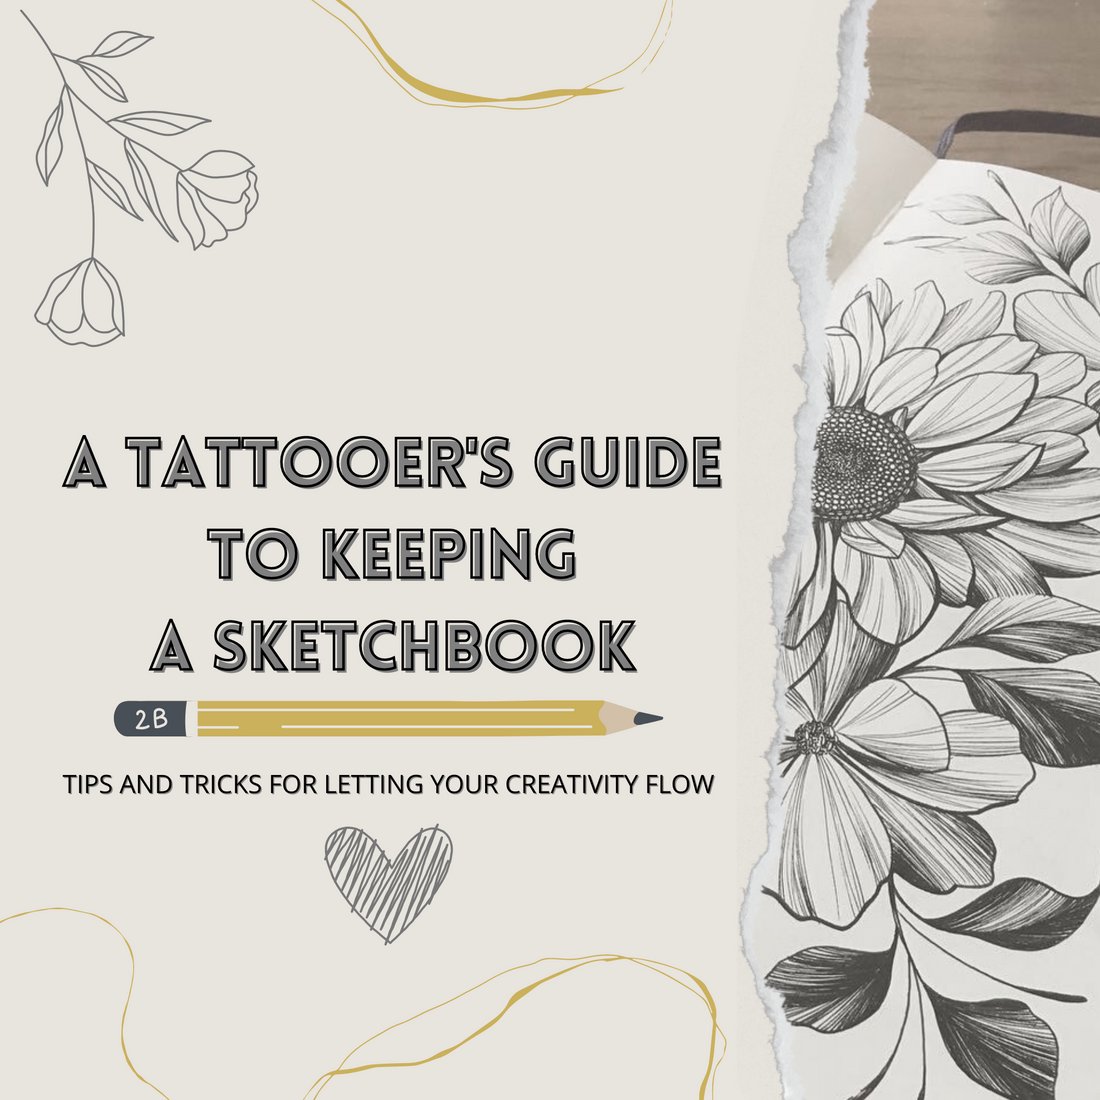 A tattooer's guide to keeping a sketchbook, blog cover by female floral tattoo artist Lu Loram Martin, in Toronto, Canada.